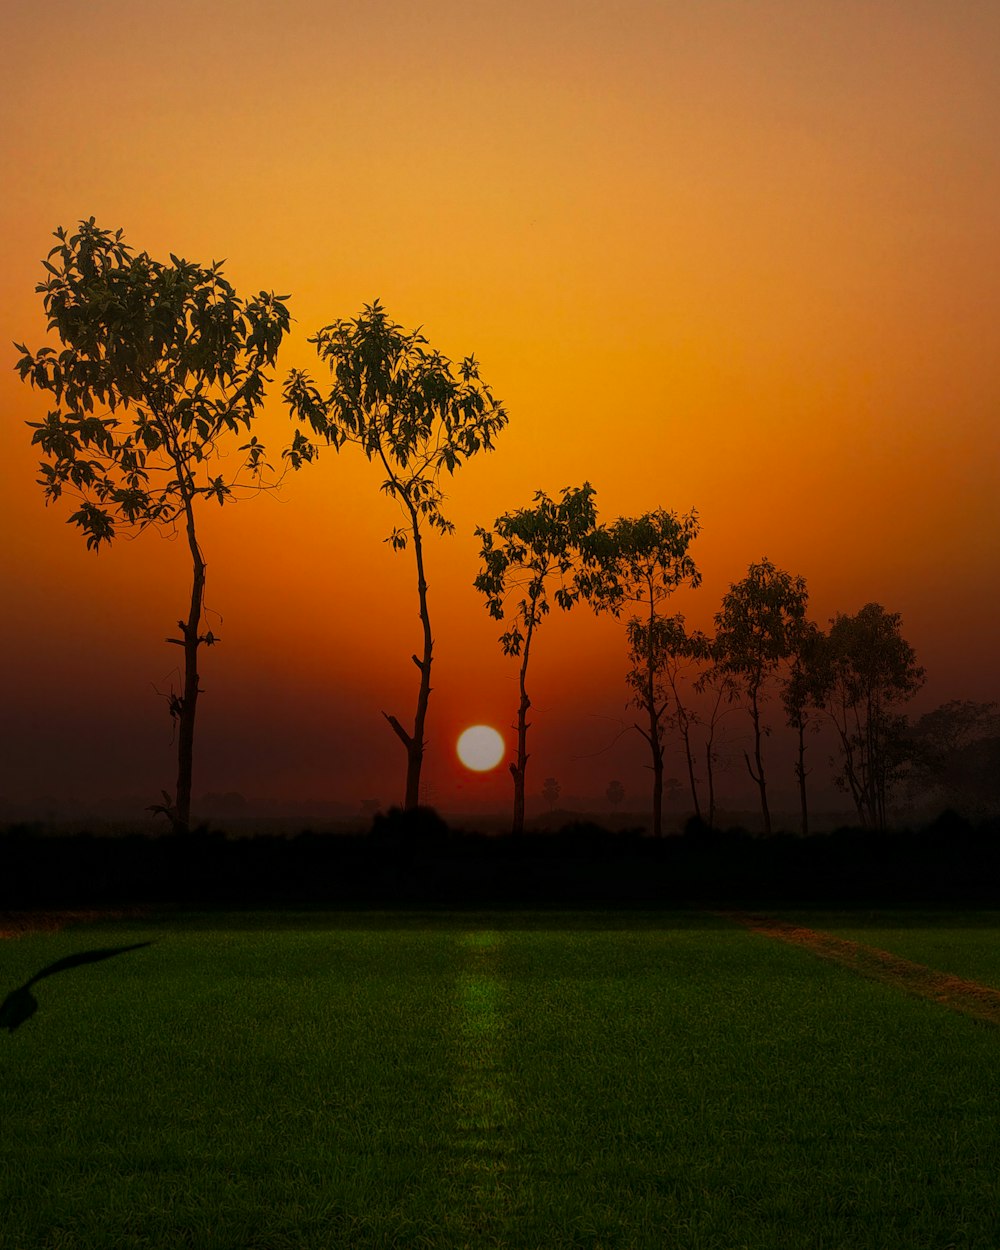 green grass field with trees during sunset